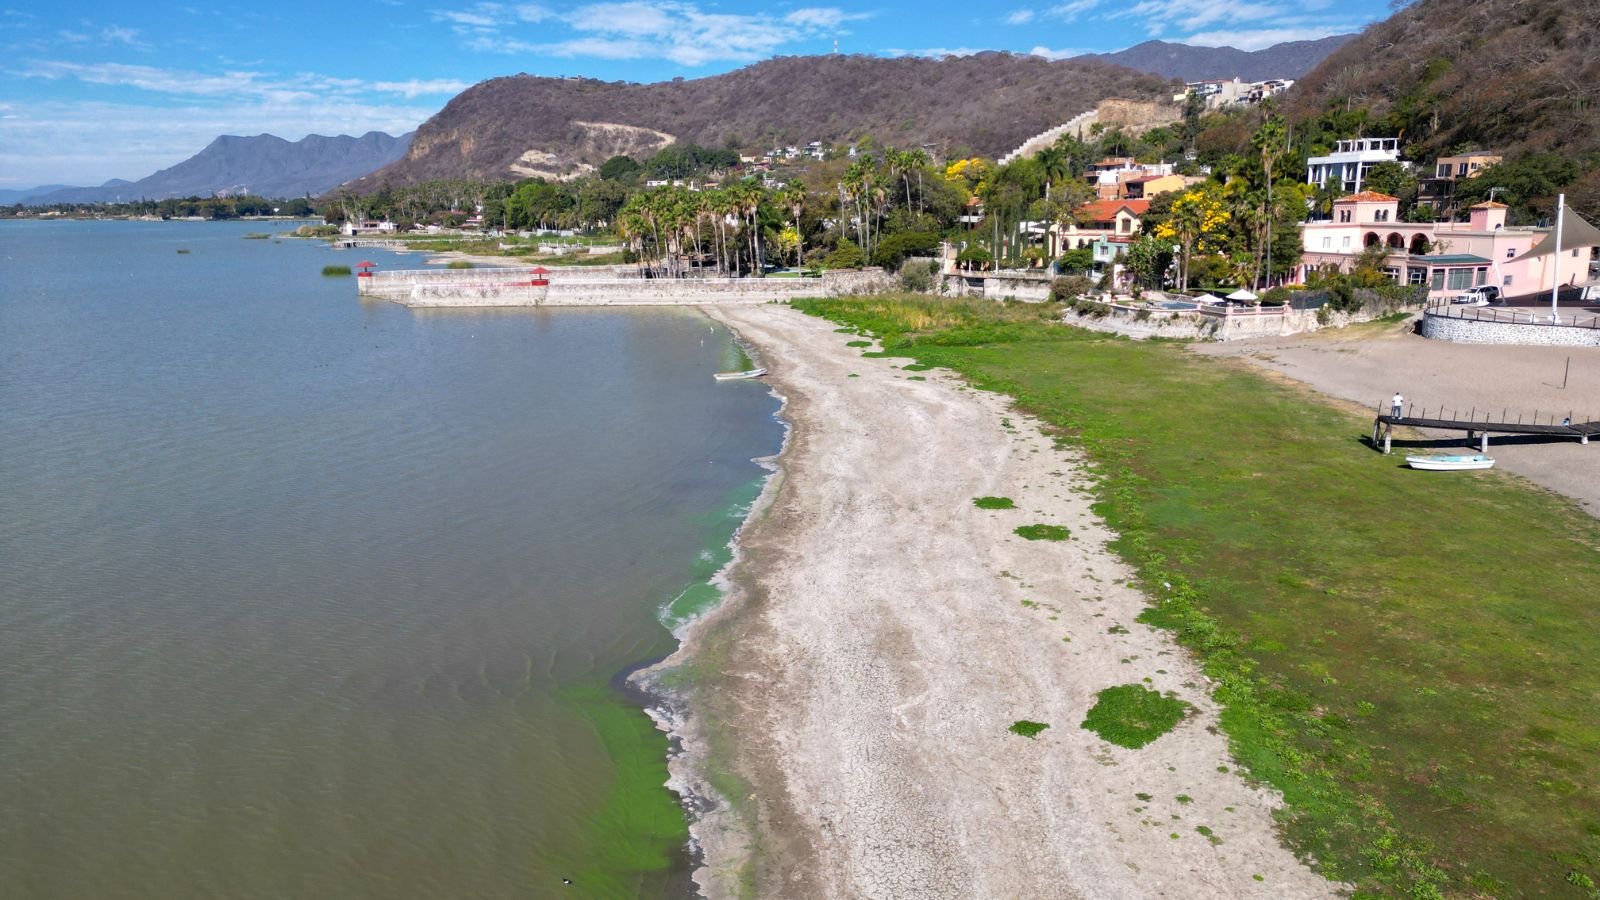 <p>Lake Chapala including Ajijic is home to <a href="https://internationalliving.com/countries/mexico/lake-chapala-mexico/#:~:text=Located%20in%20west%2Dcentral%20Mexico,the%20vast%20majority%20are%20retired." rel="noopener">about 20,000 expats</a>, making this city the largest expat community in Mexico. The area’s serene atmosphere and pleasant weather draw many “snowbirds” escaping harsh winter. You can comfortably reside in this city within a range of <a href="https://focusonmexico.com/cost-living-mexico-lake-chapala/#:~:text=In%20general%2C%20the%20estimated%20cost,whether%20you%20own%20or%20rent." rel="noopener">$1,200 to $3,000 per</a> month. With a population of over 50,000 in the municipality, it offers a new world-class hospital and assisted living homes.</p>